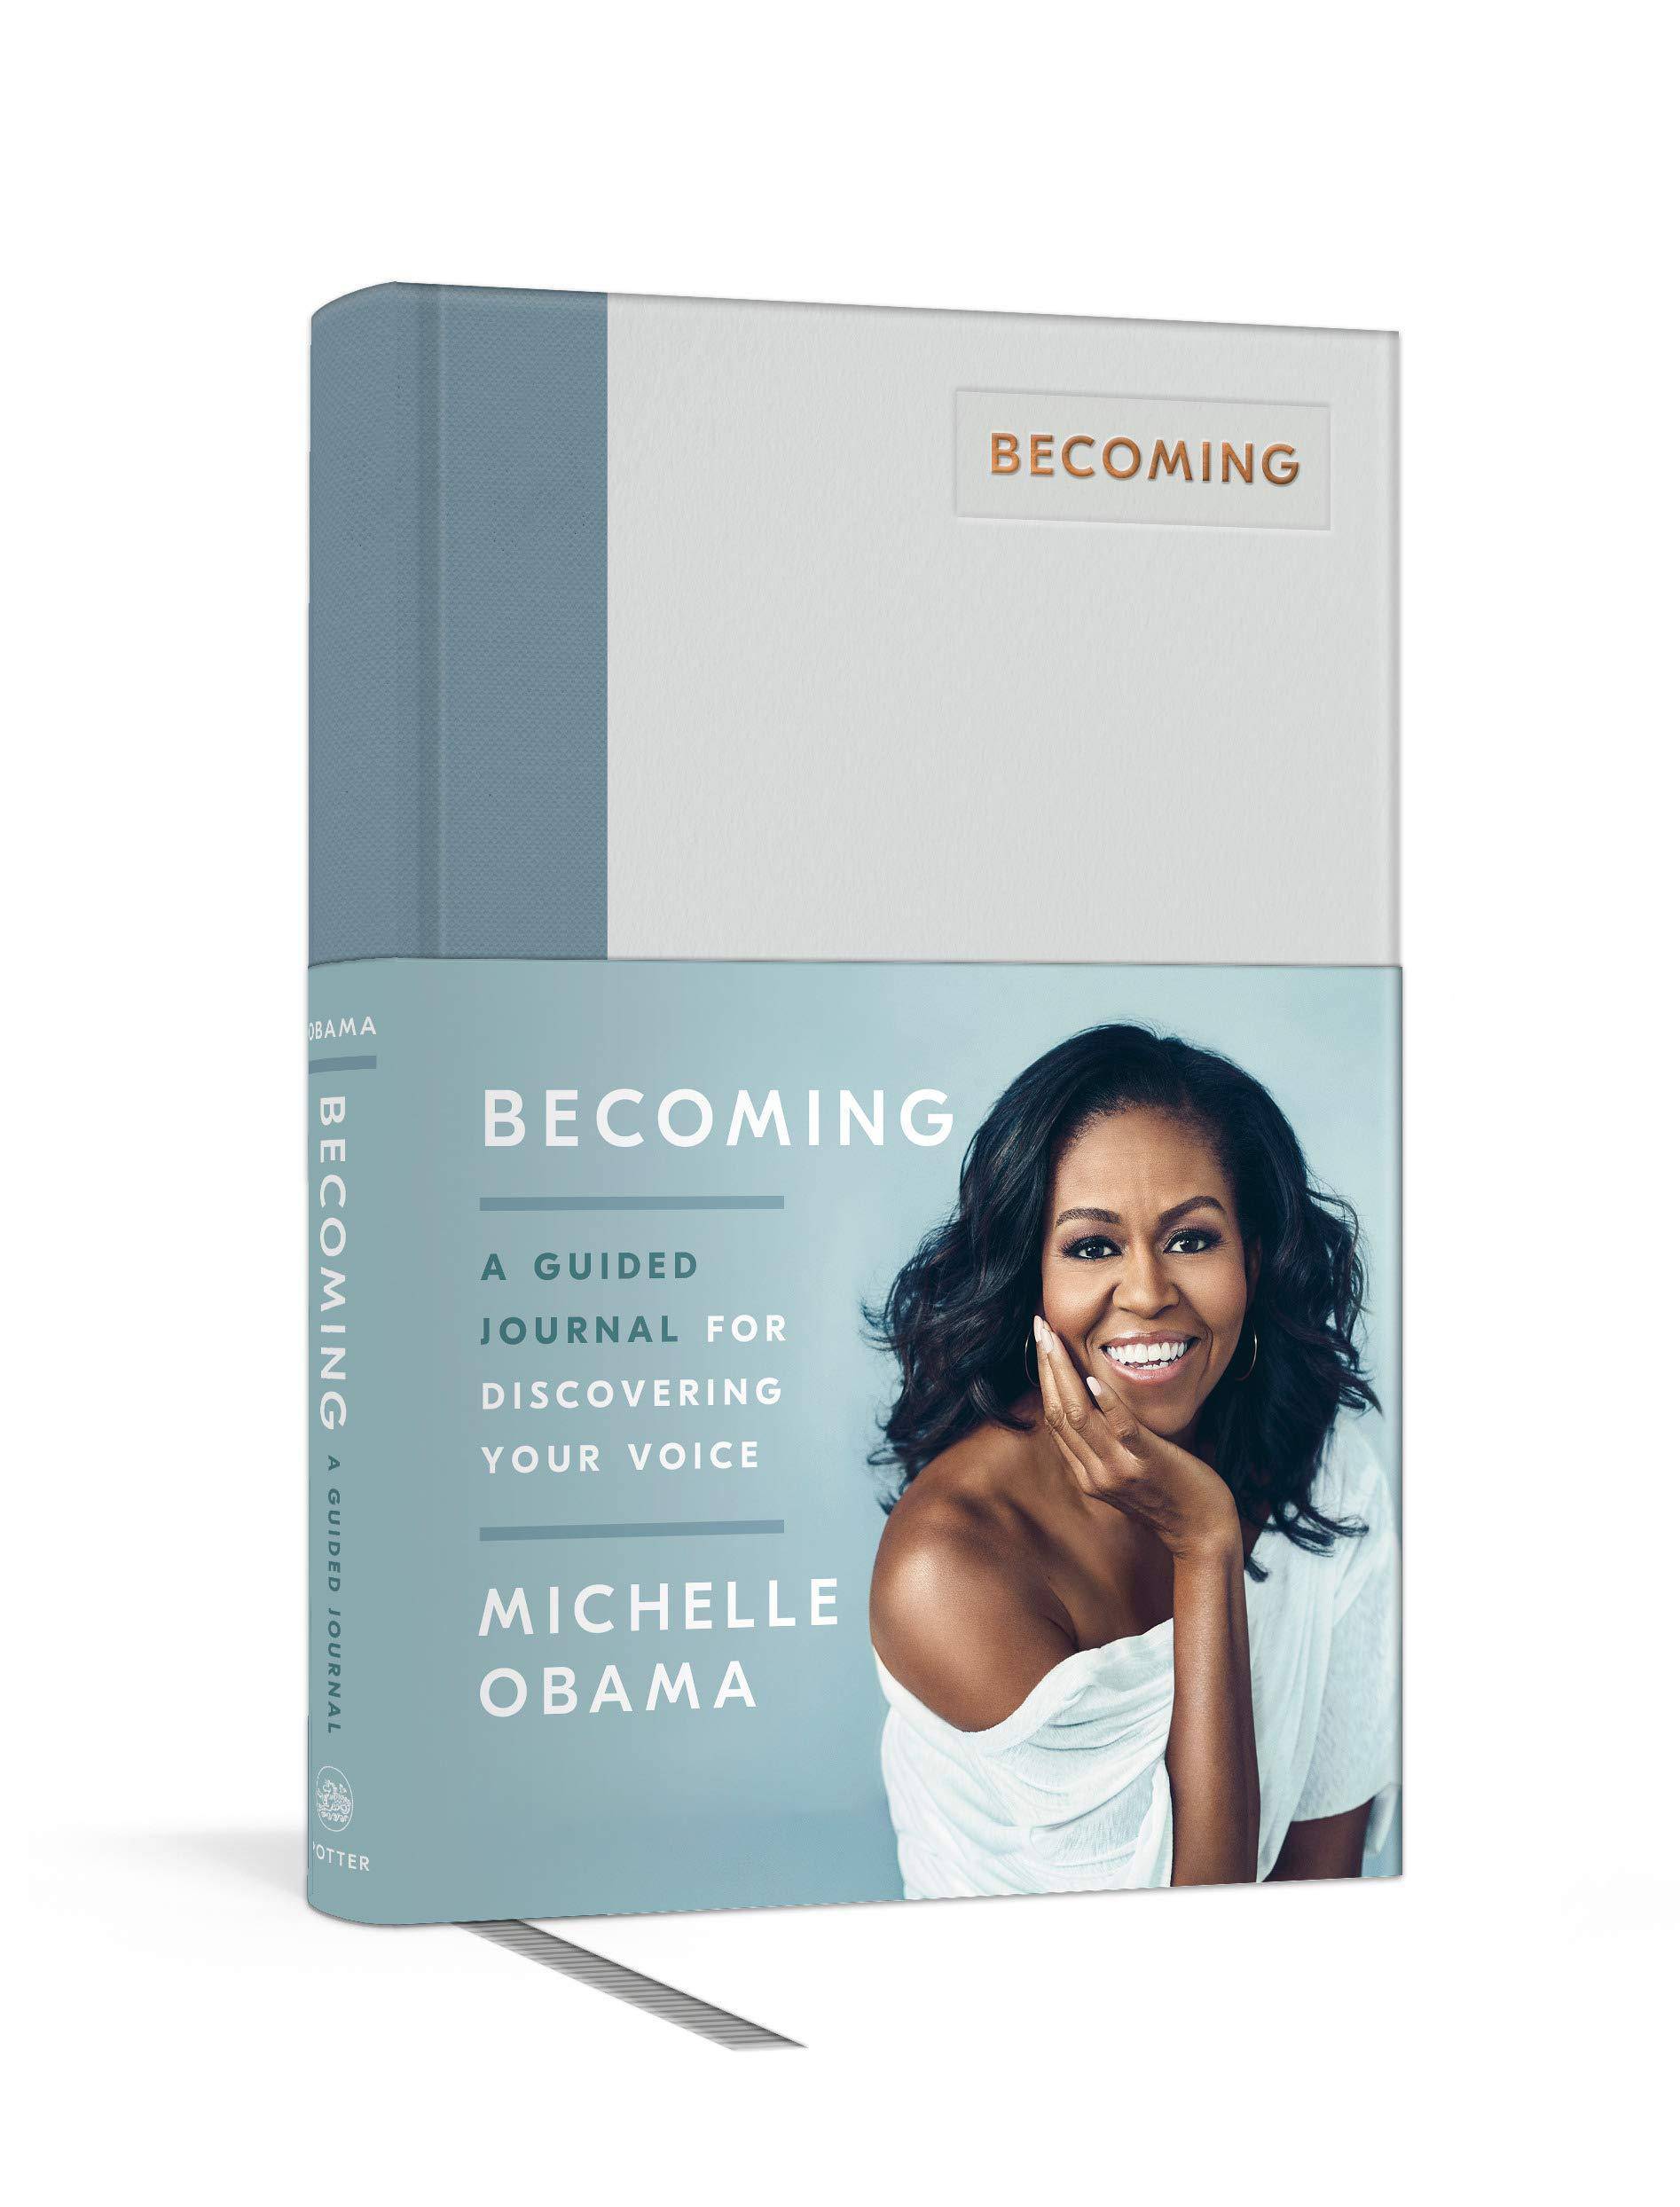 Becoming: A Guided Journal for Discovering Your Voice - SureShot Books Publishing LLC